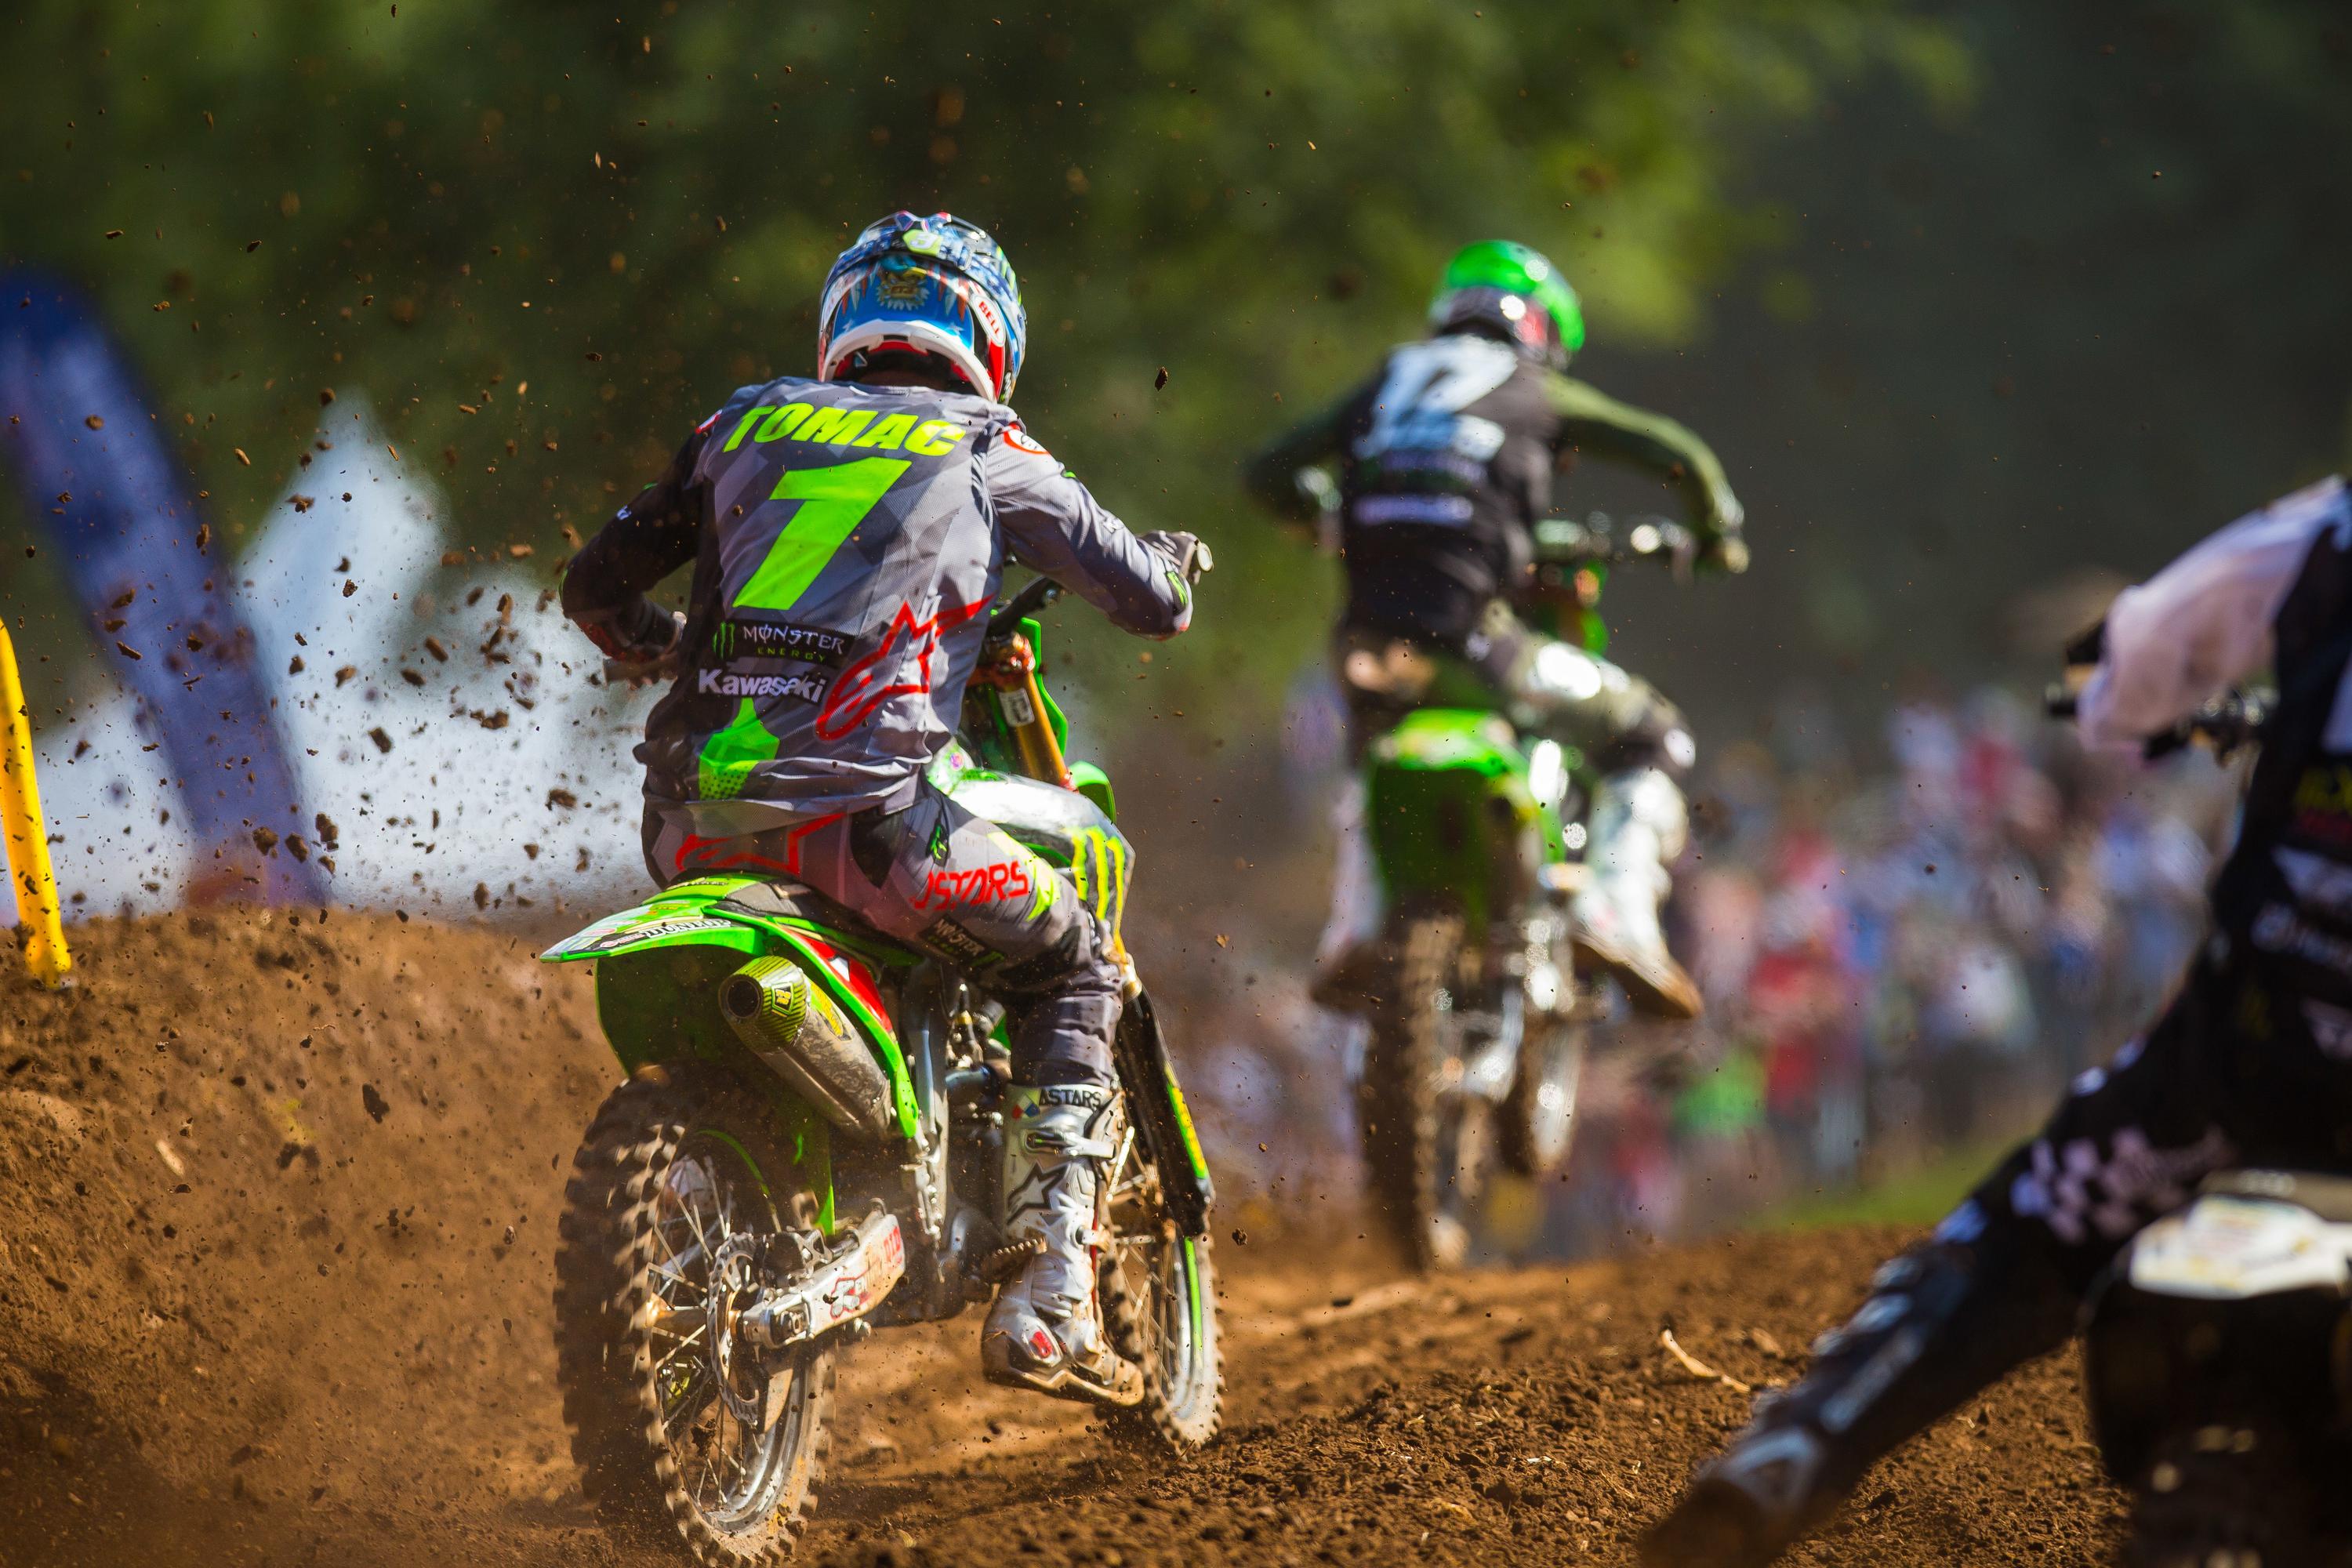 RLT Competition Bulletin 2020-17: Updates to Pro Motocross and GNCC Schedules